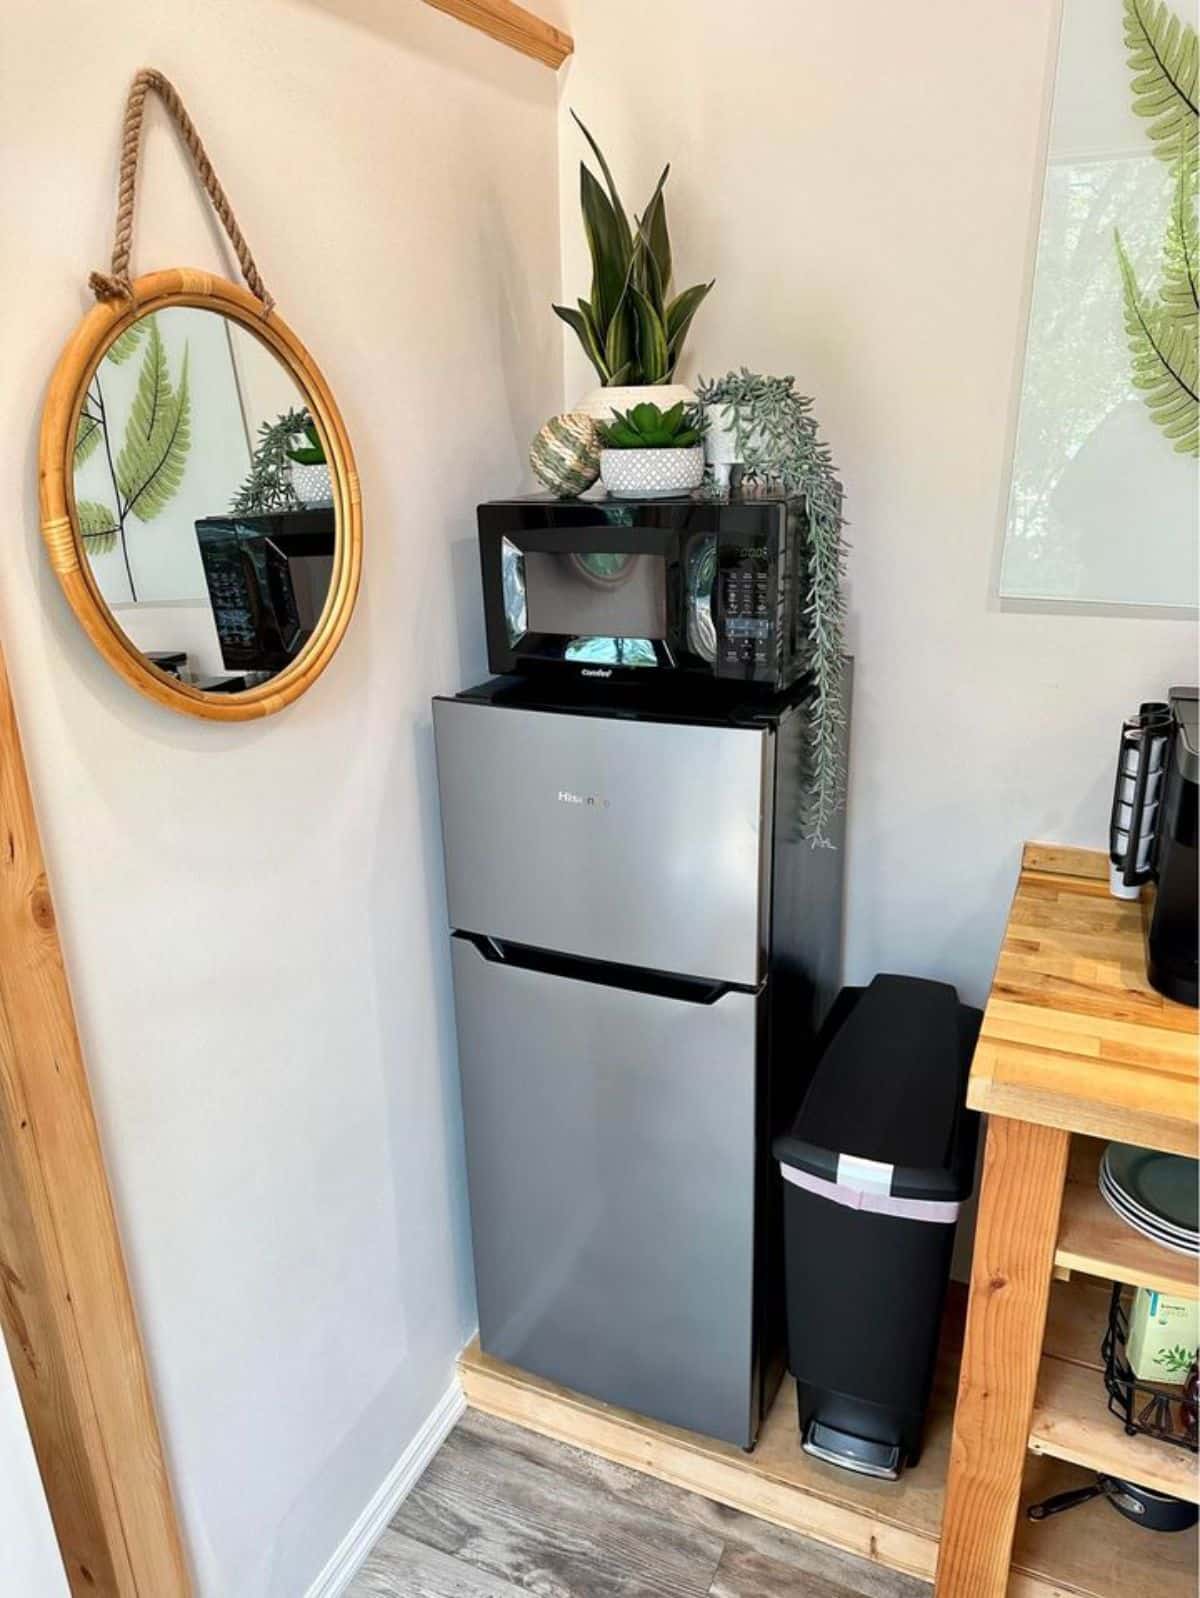 Double door refrigerator, microwave oven is all included in the deal of 20’ turnkey ready tiny house